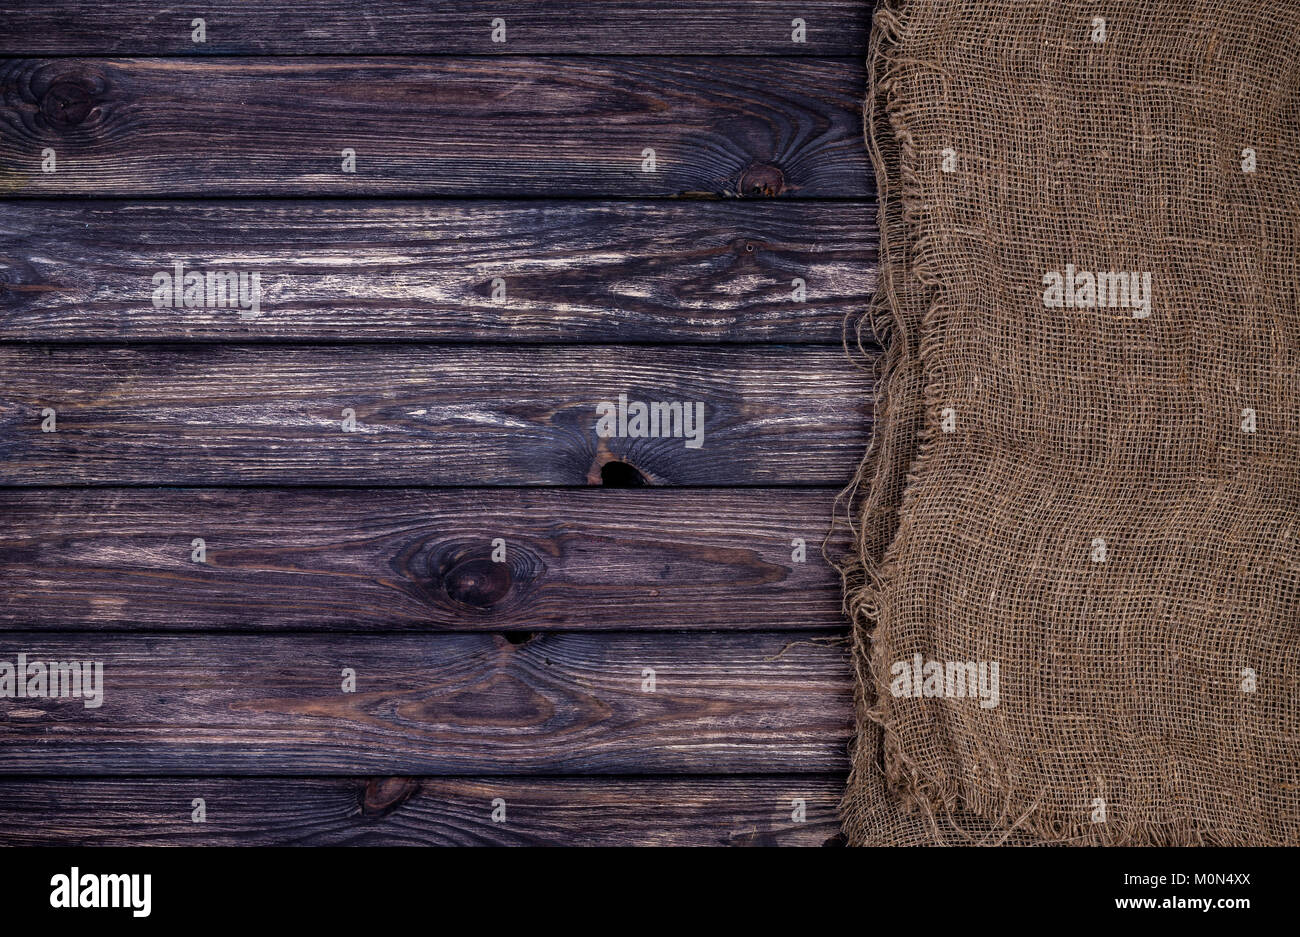 Dark wooden texture with burlap, wood and sack Stock Photo